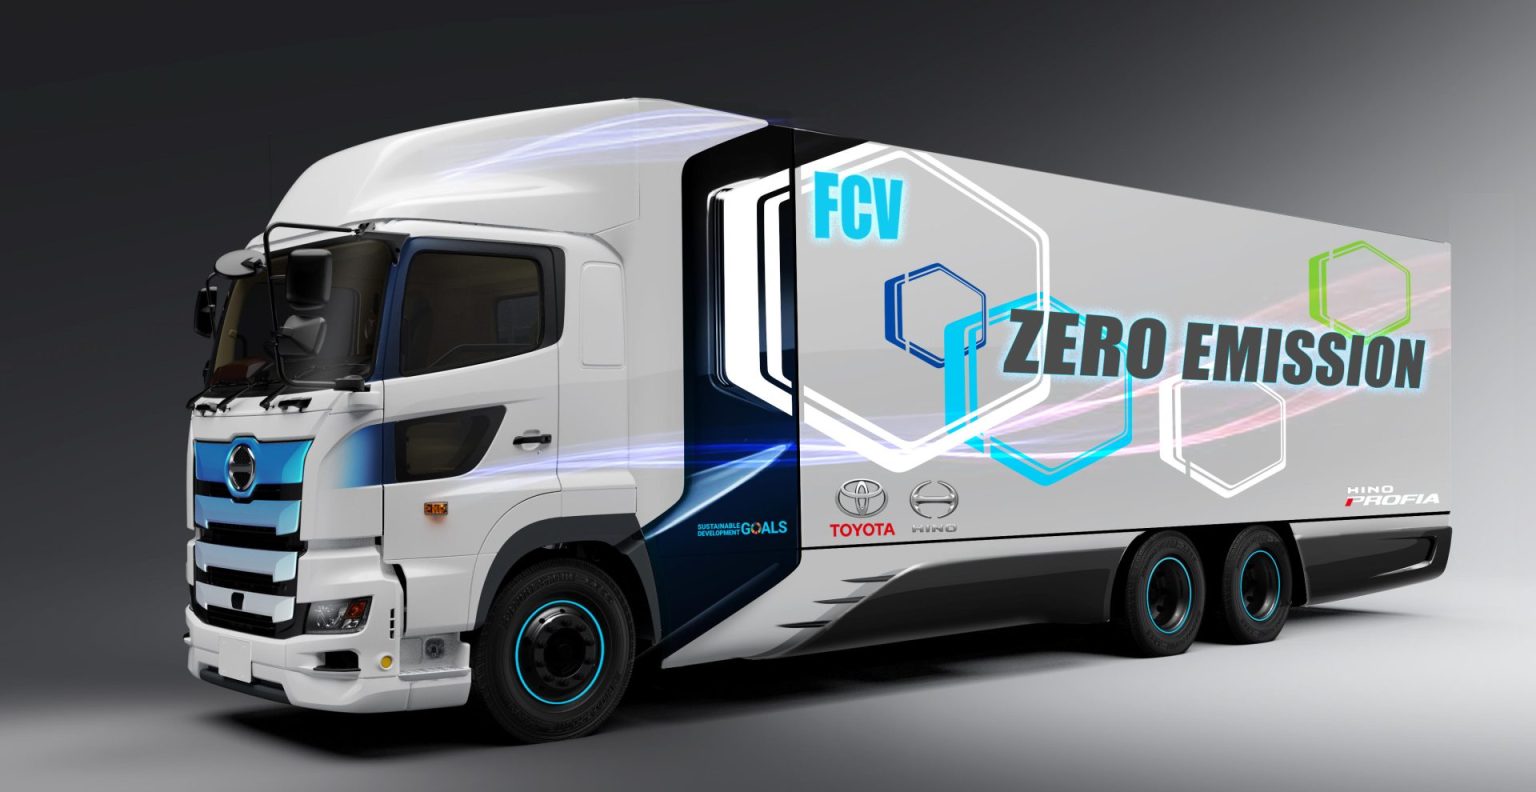 Daimler Truck,Mitsubishi Fuso,Hino,Toyota,MoU,advanced technologies,carbon neutrality,merging,MFTBC,commercial vehicle development,CASE technologies,global competition,sustainable mobility,collaboration,sustainable trucking,sustainable transportation,sustainable transportation examples